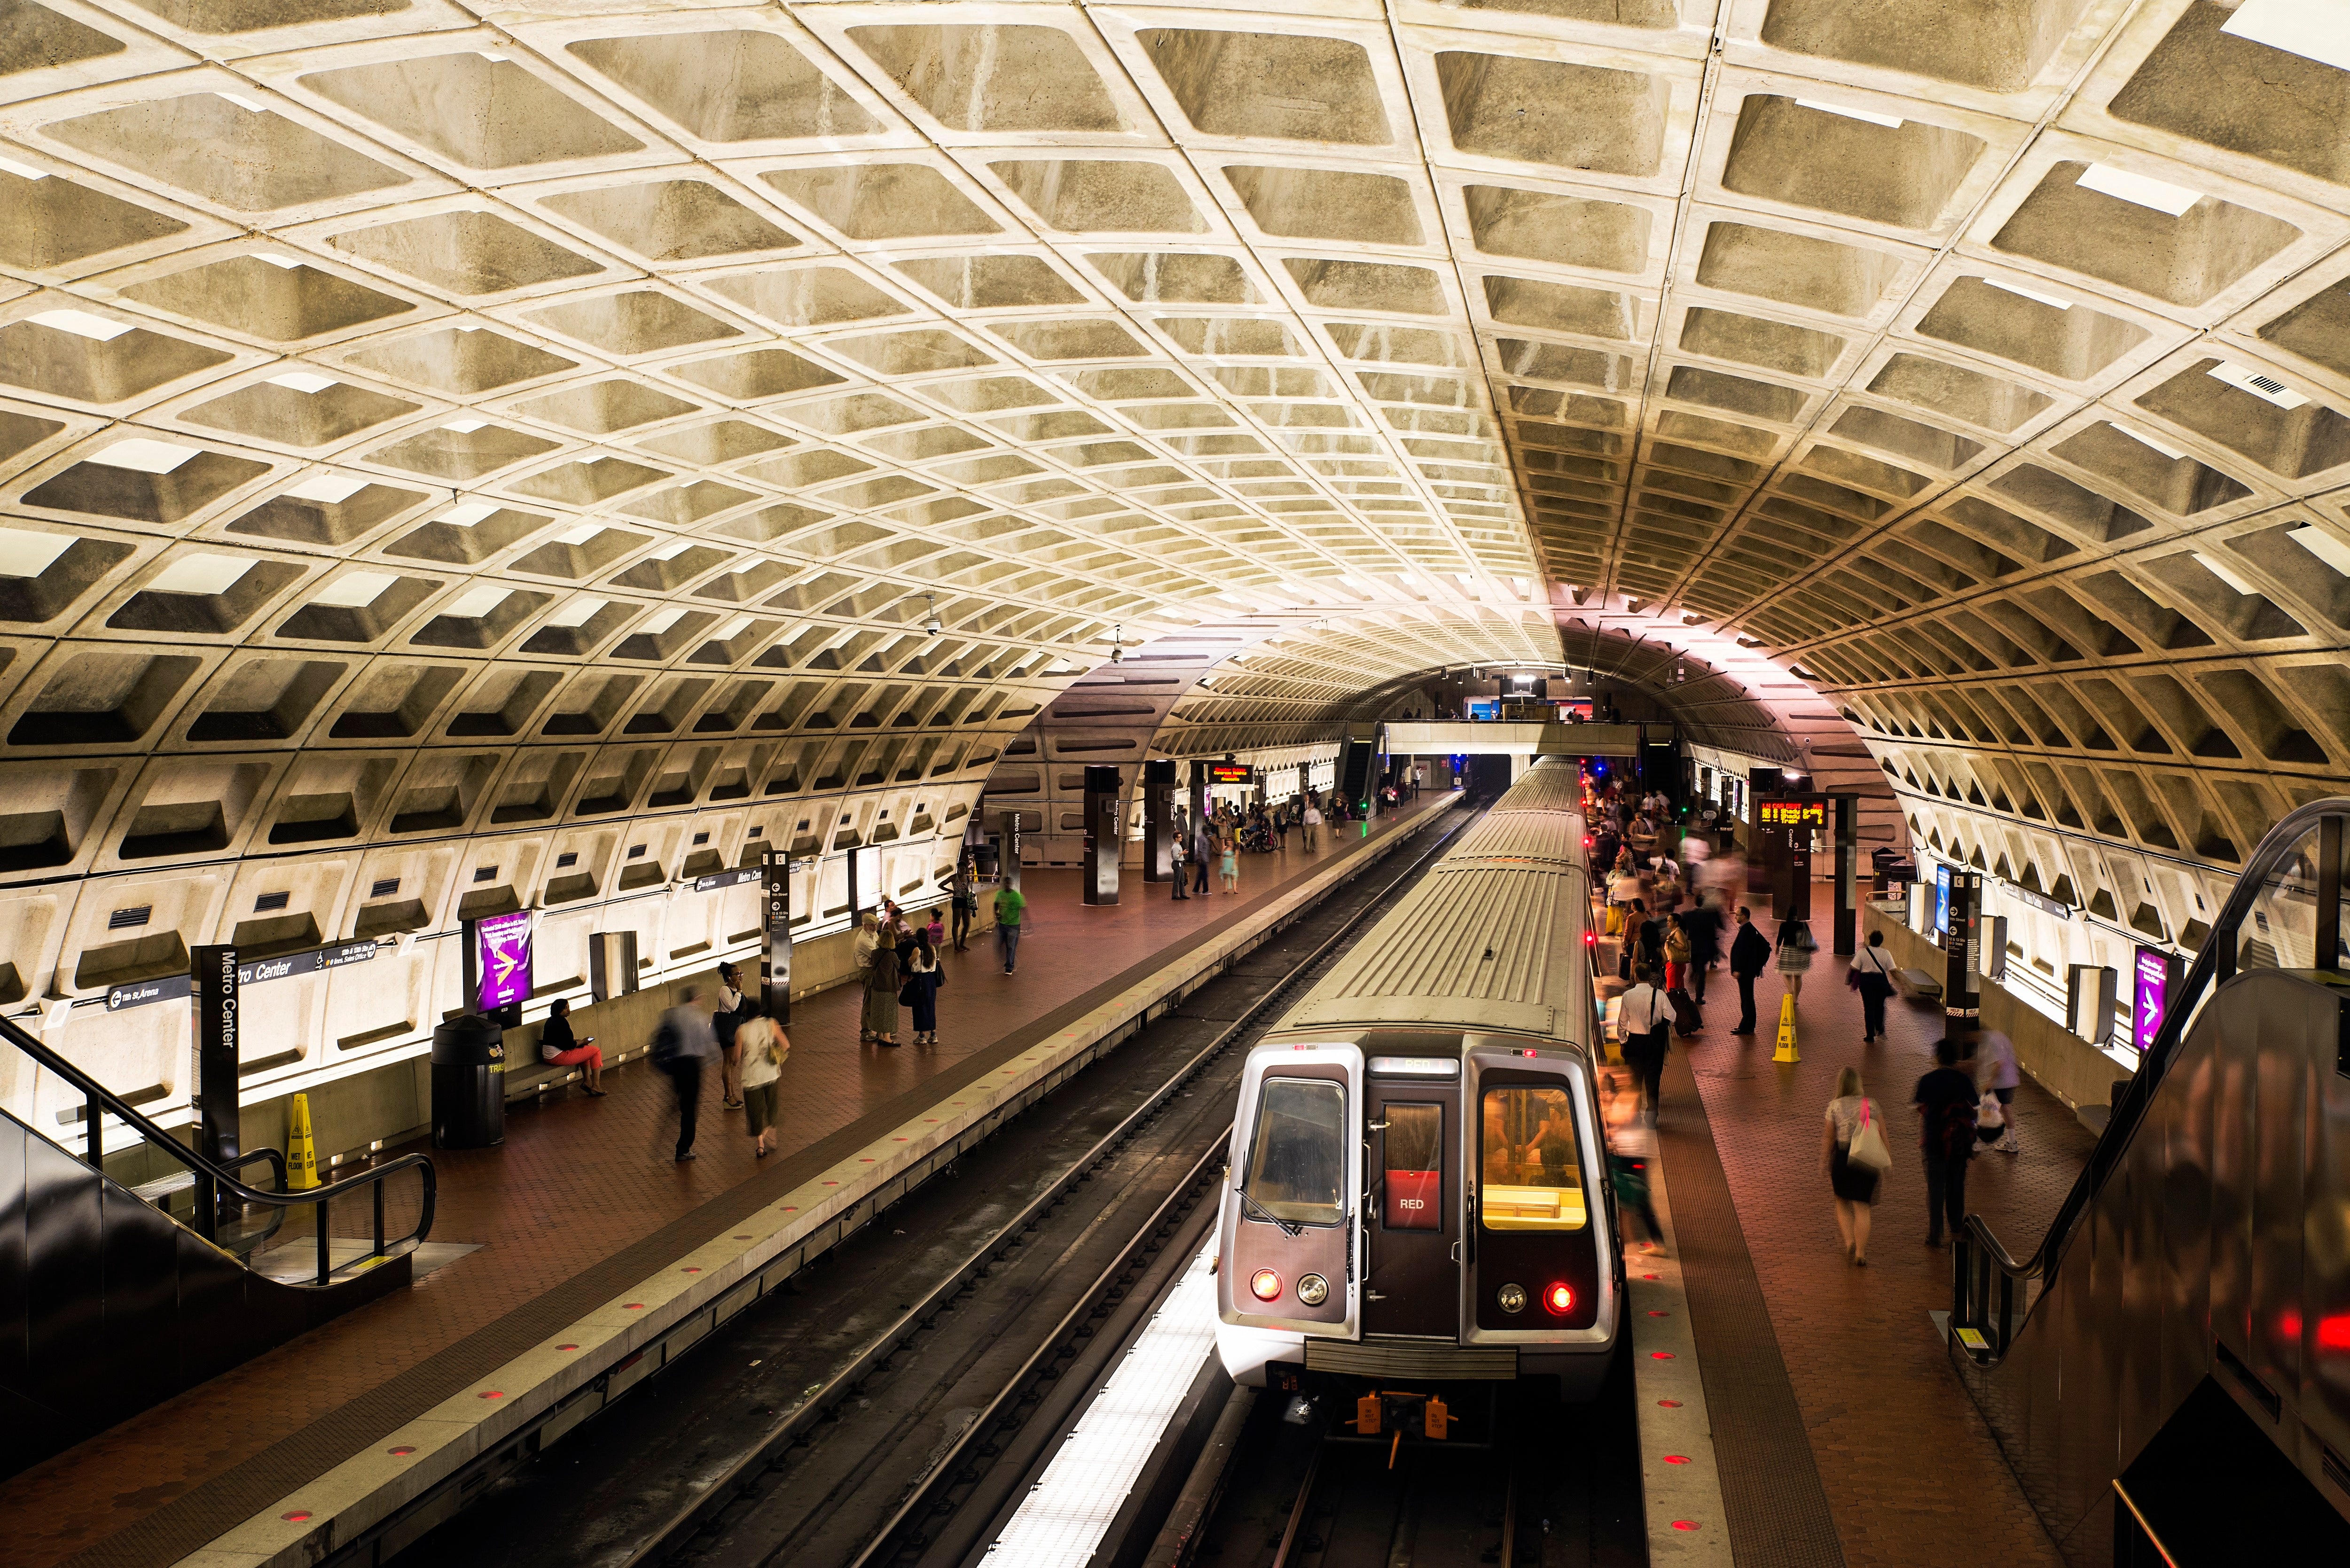 Book Publisher Eviscerates Writer Following DC Metro Shaming Lawsuit